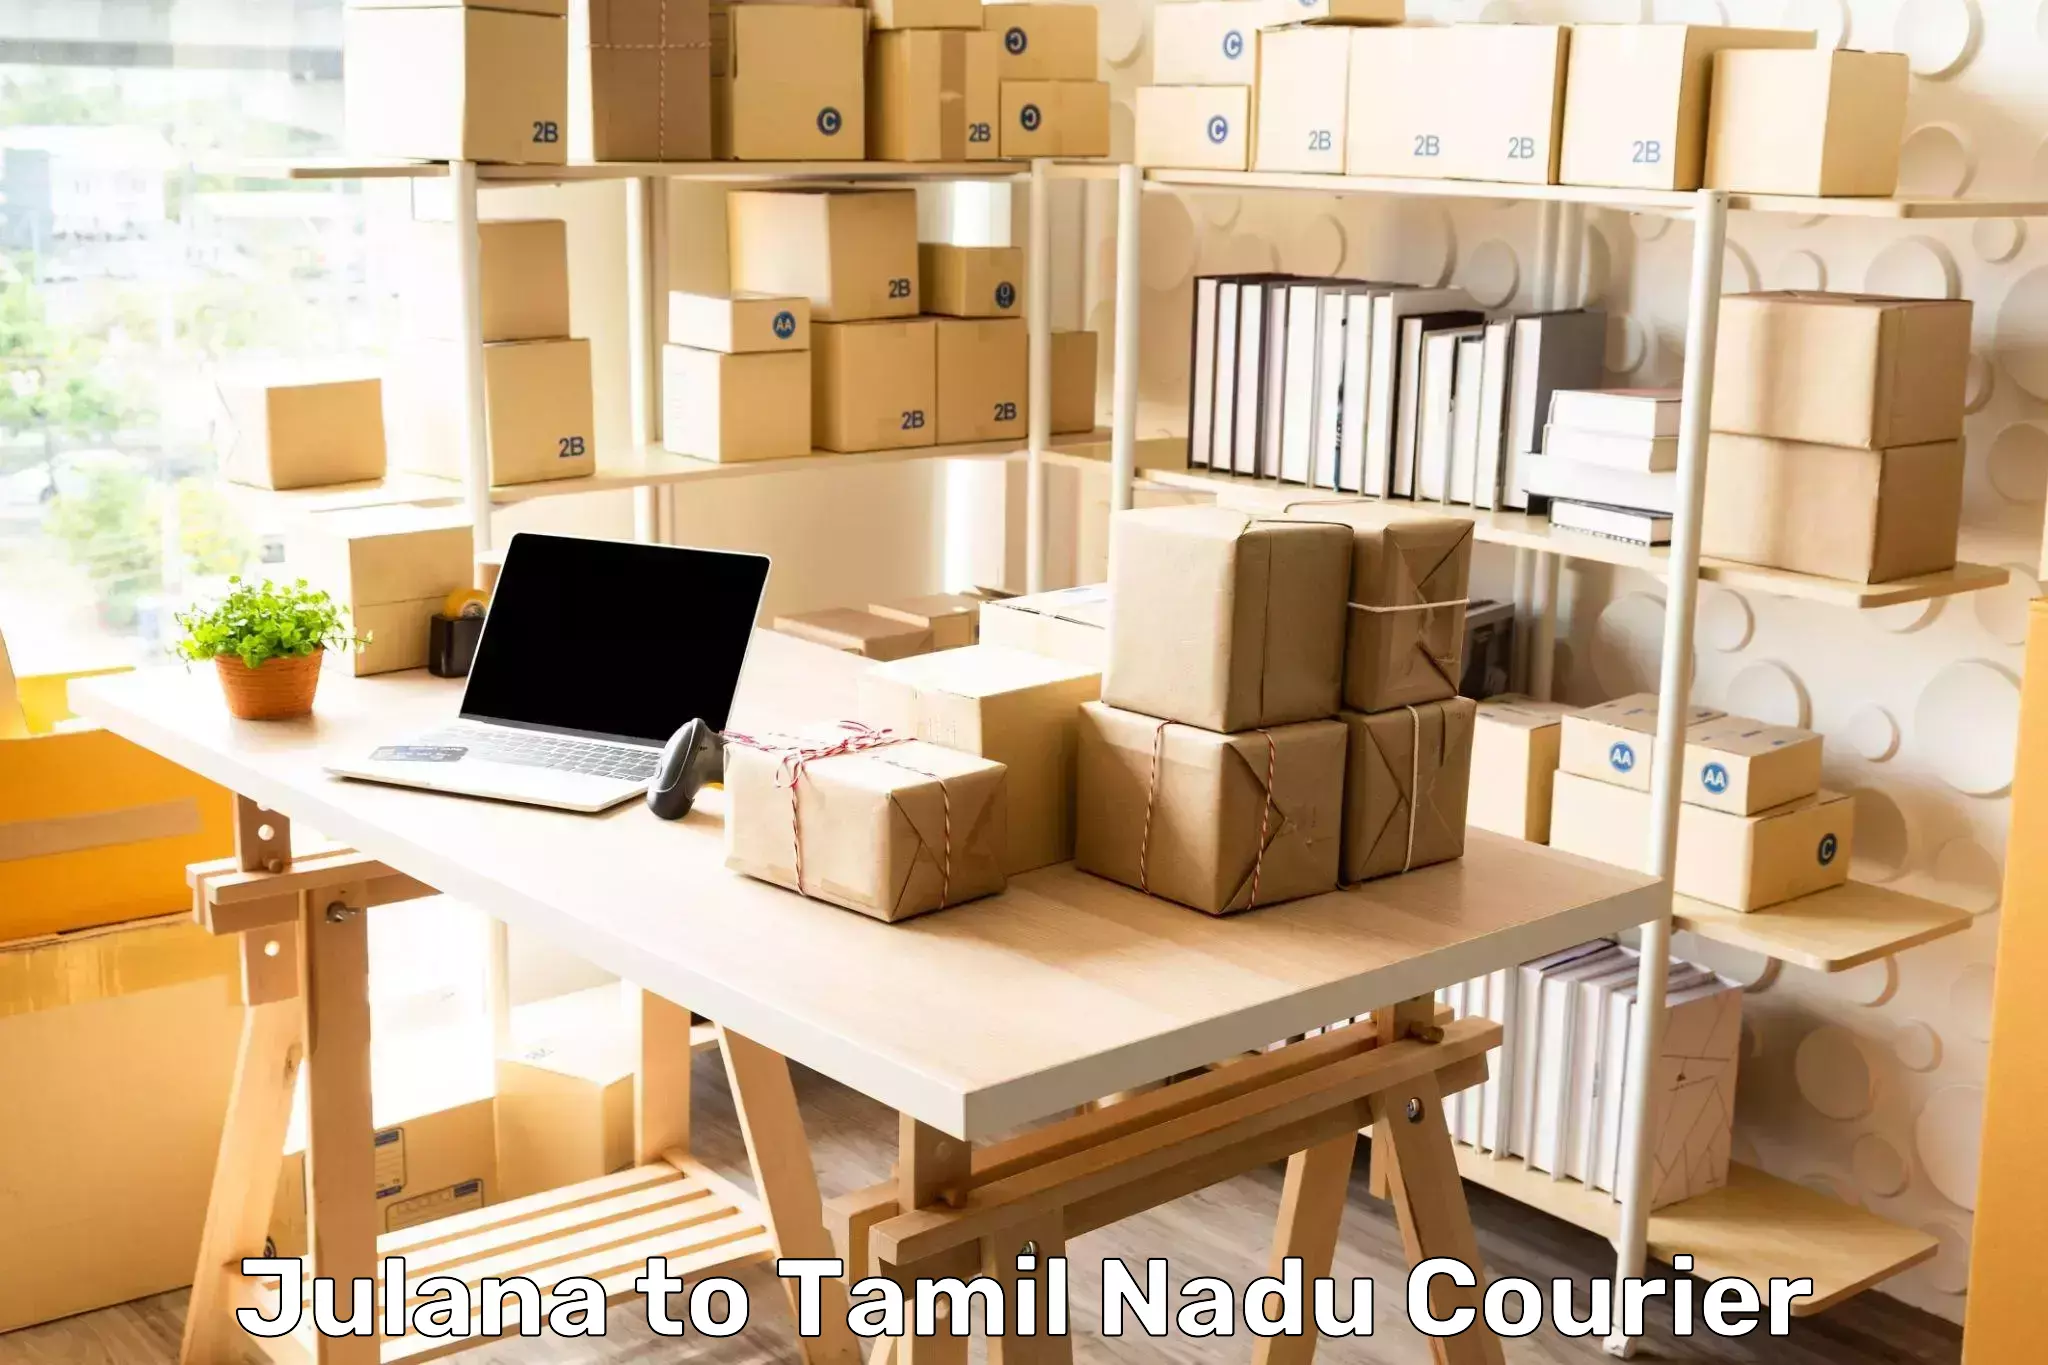 Sustainable shipping practices Julana to Tamil Nadu